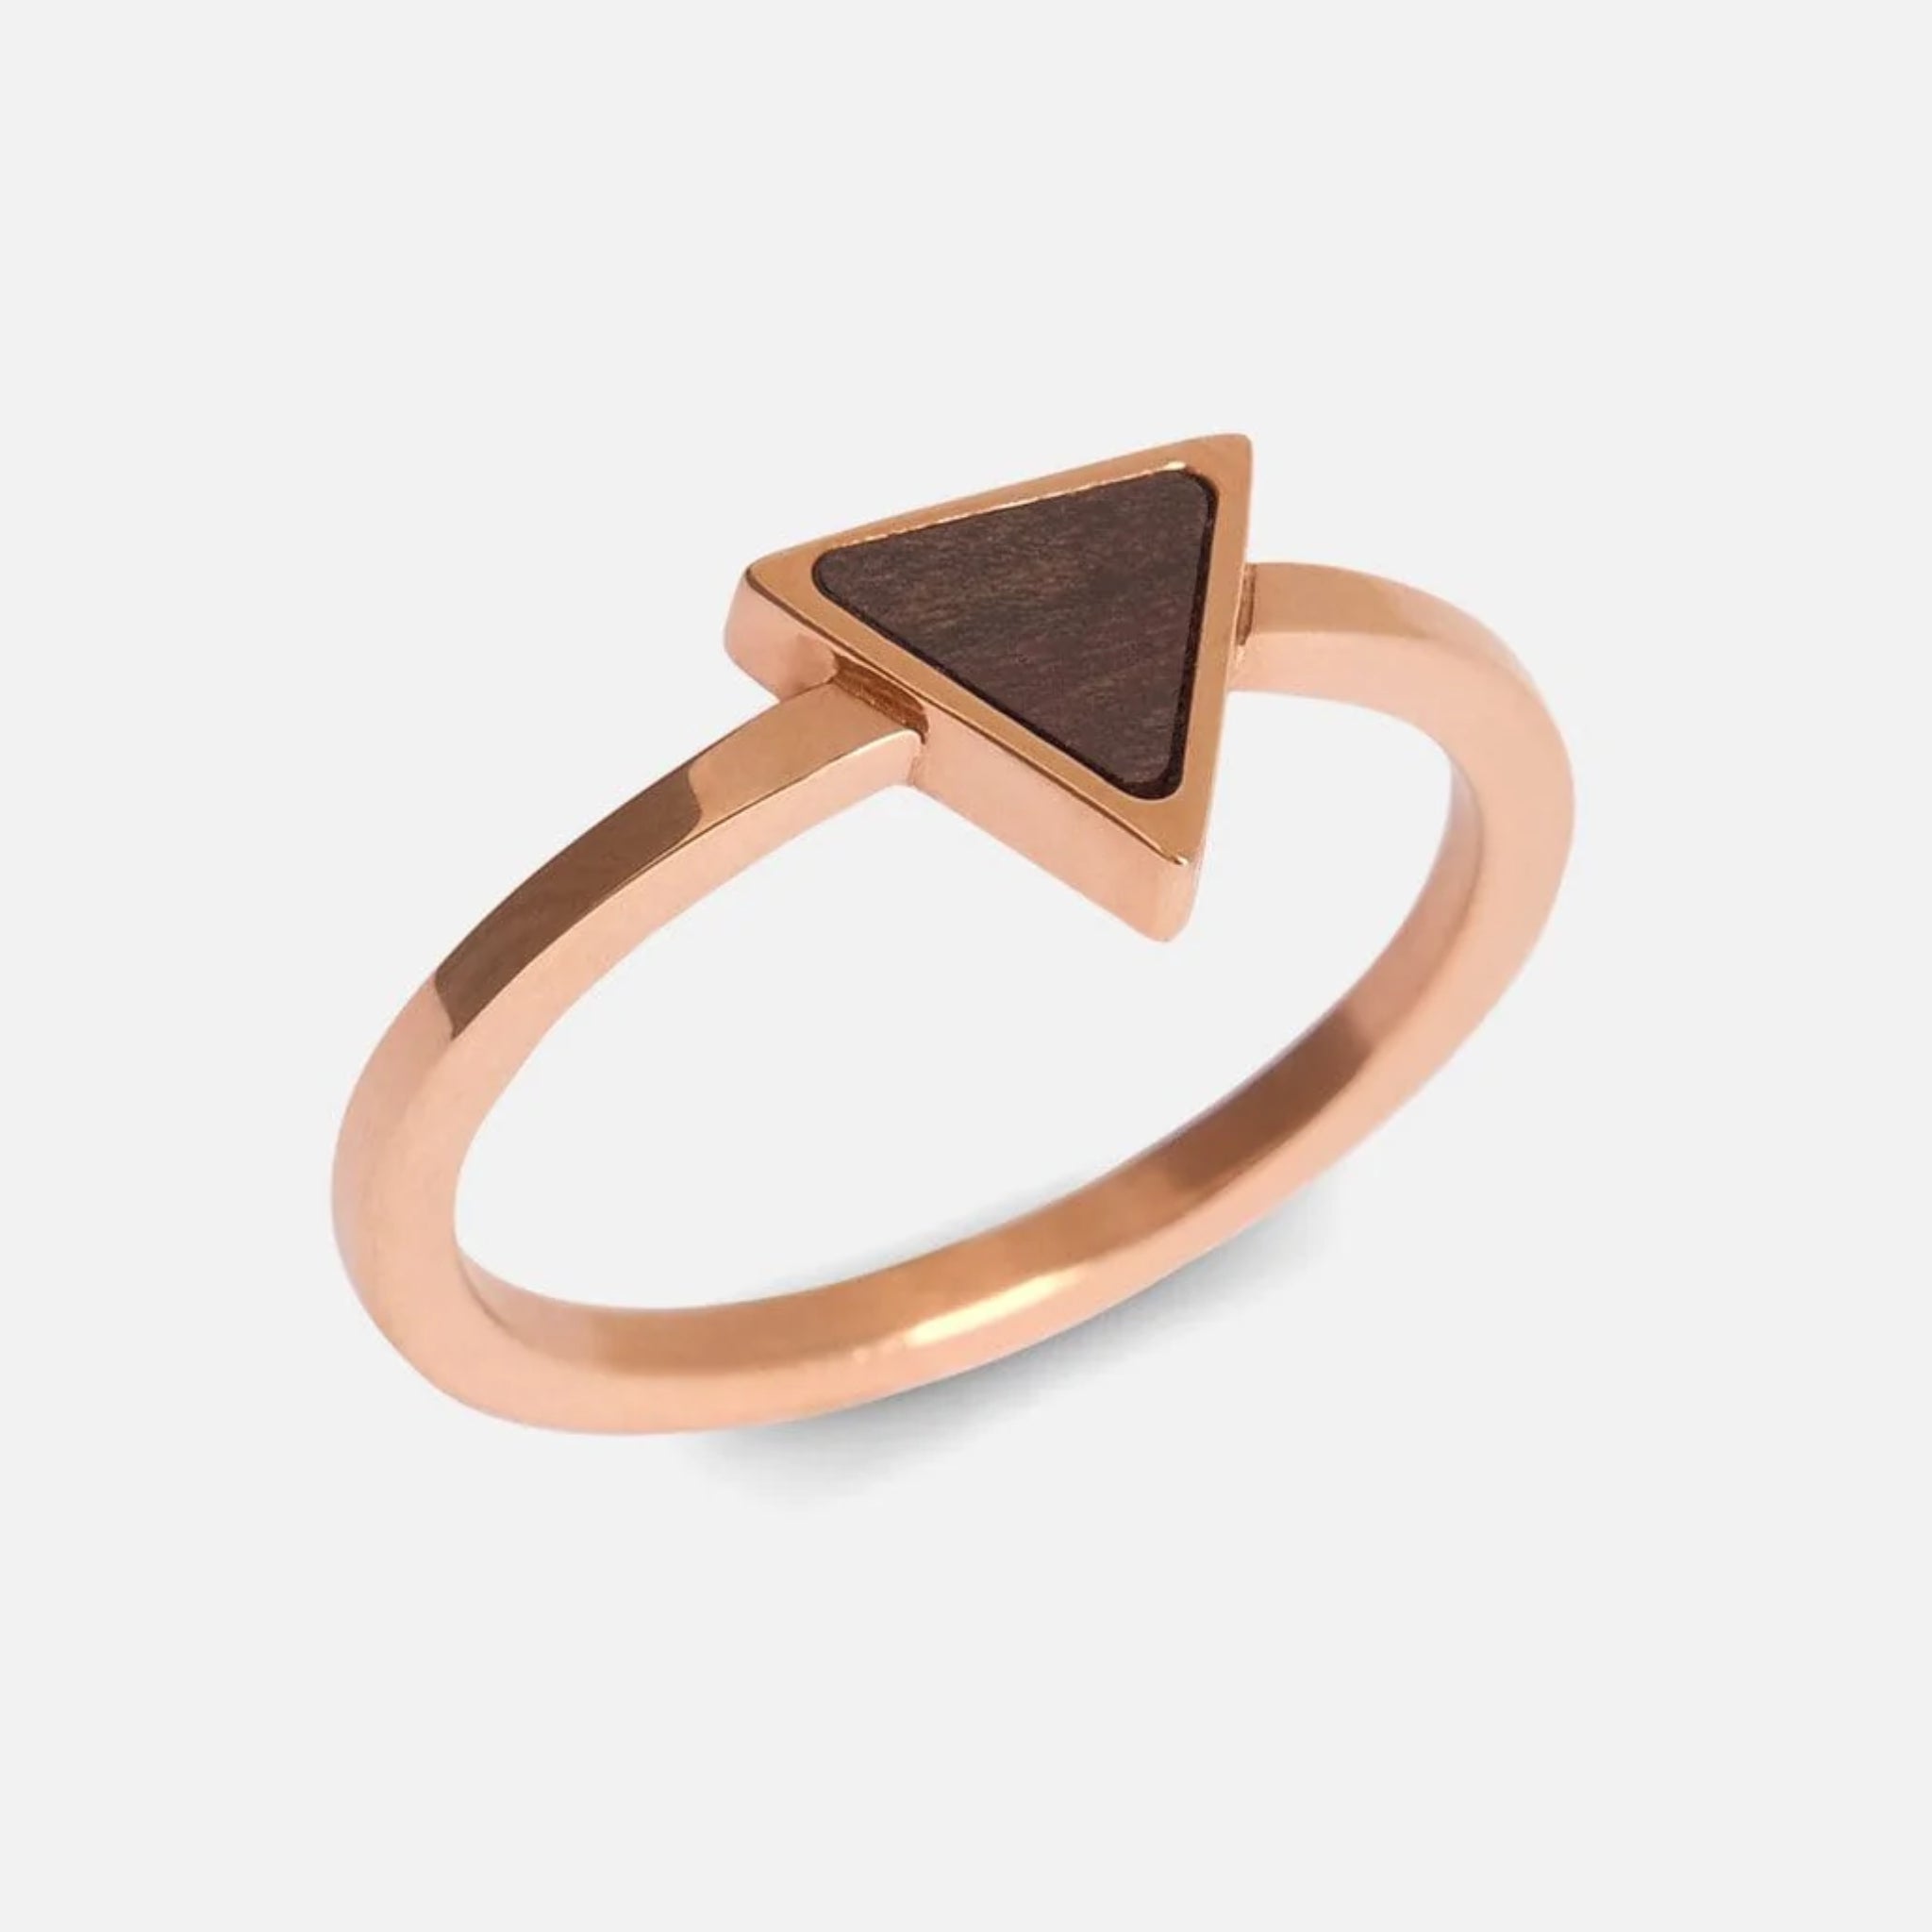 KERBHOLZ Ring "TRIANGLE RING"